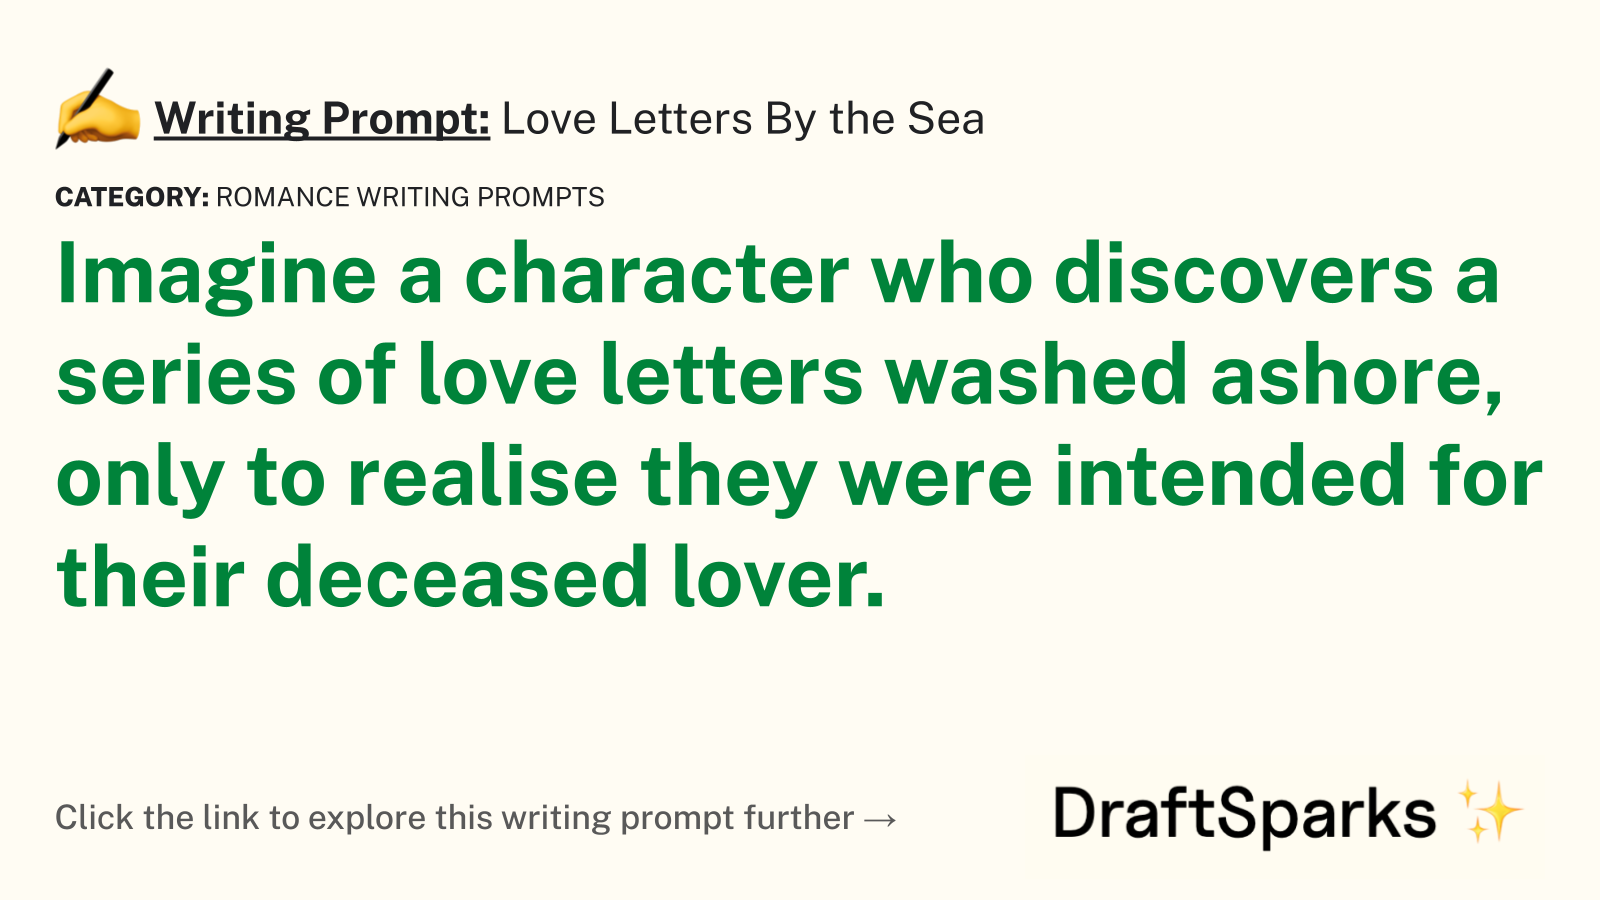 Love Letters By the Sea